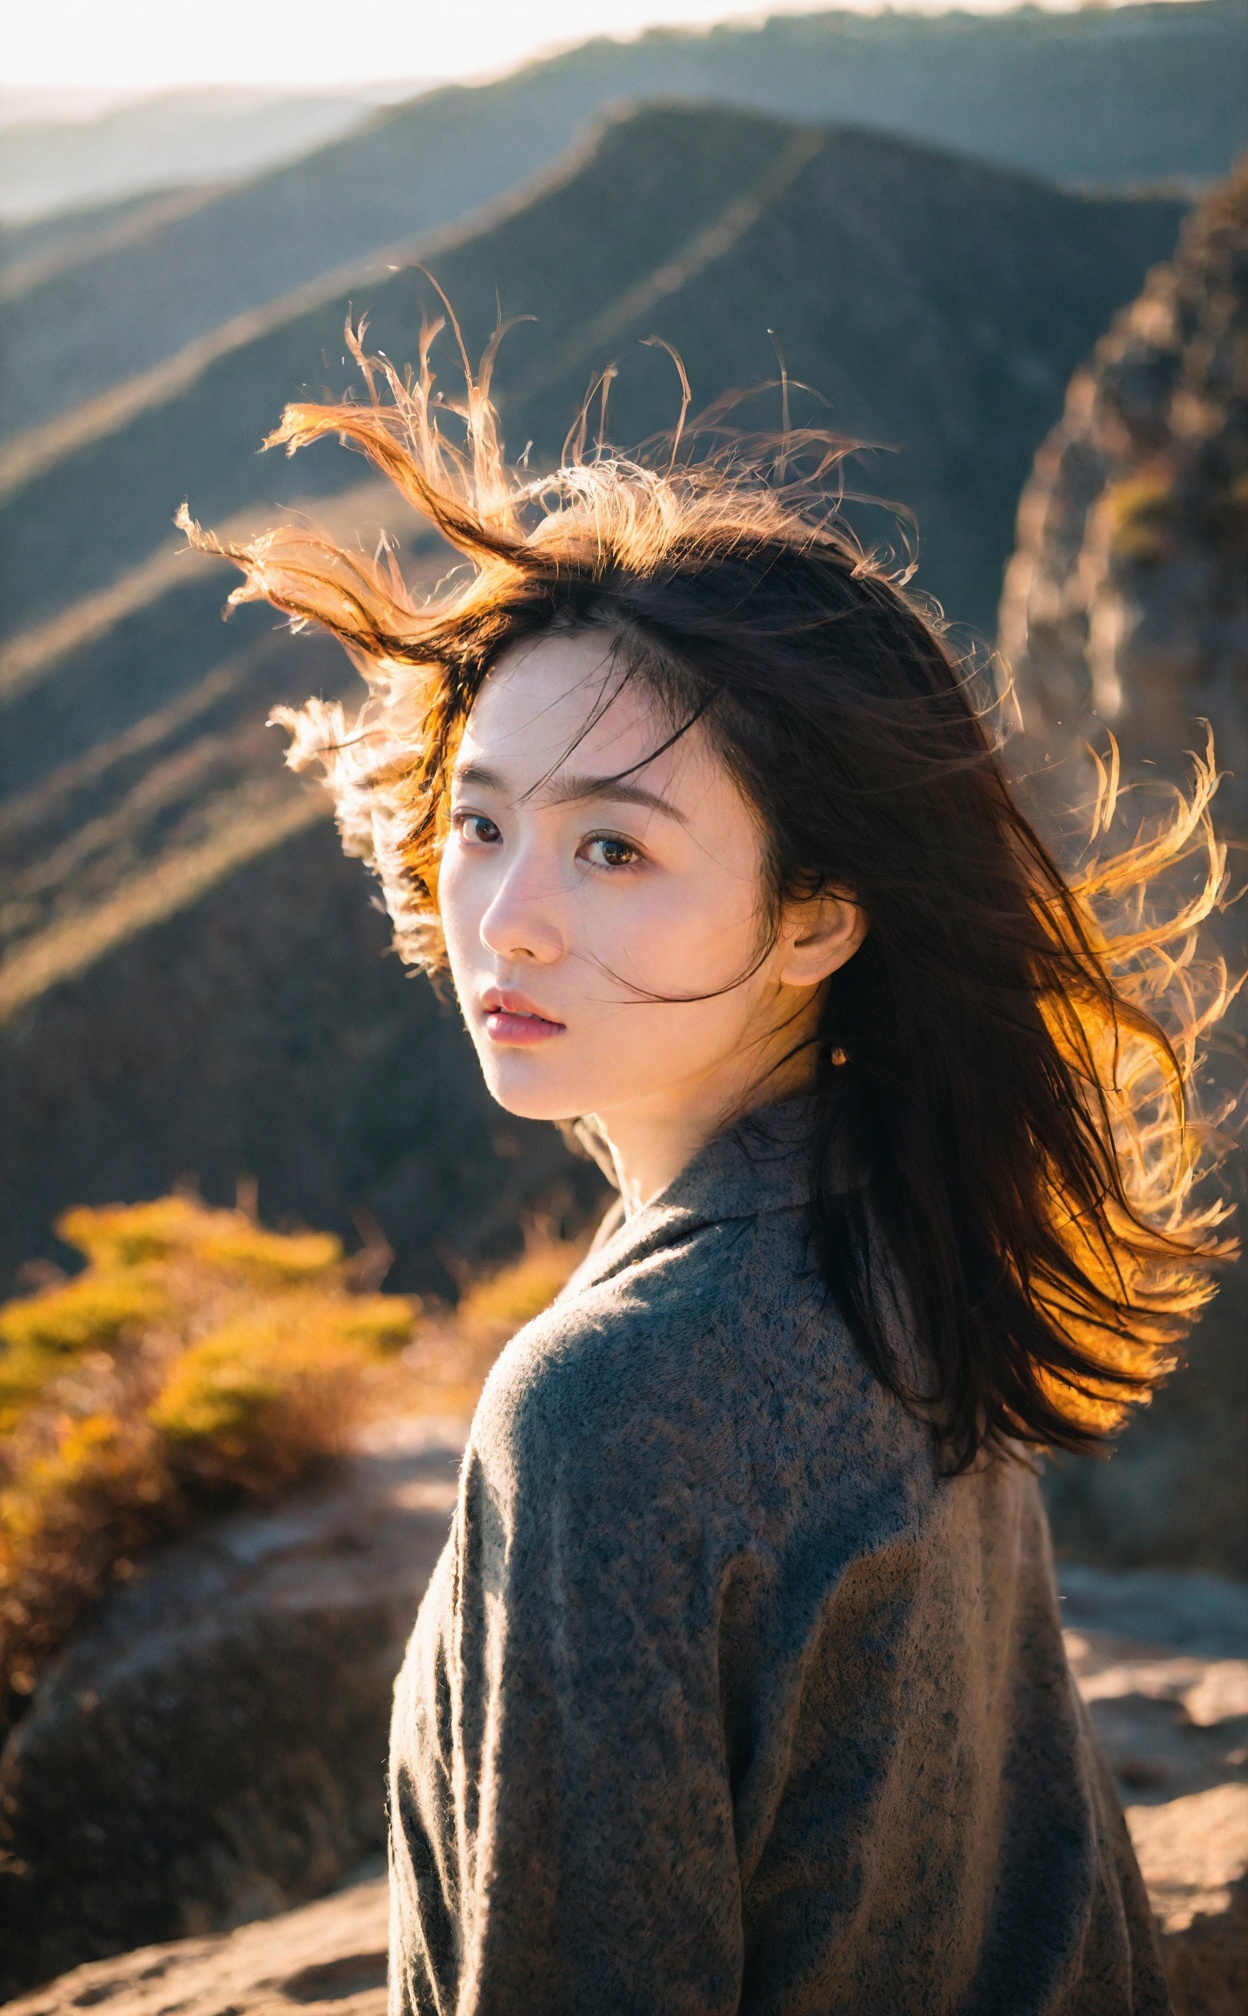 mugglelight,a young woman with windswept hair,standing on a cliff at sunrise,backlit by the morning sun,dramatic shadows,serene expression,breathtaking scenery.,korean girl,black hair,